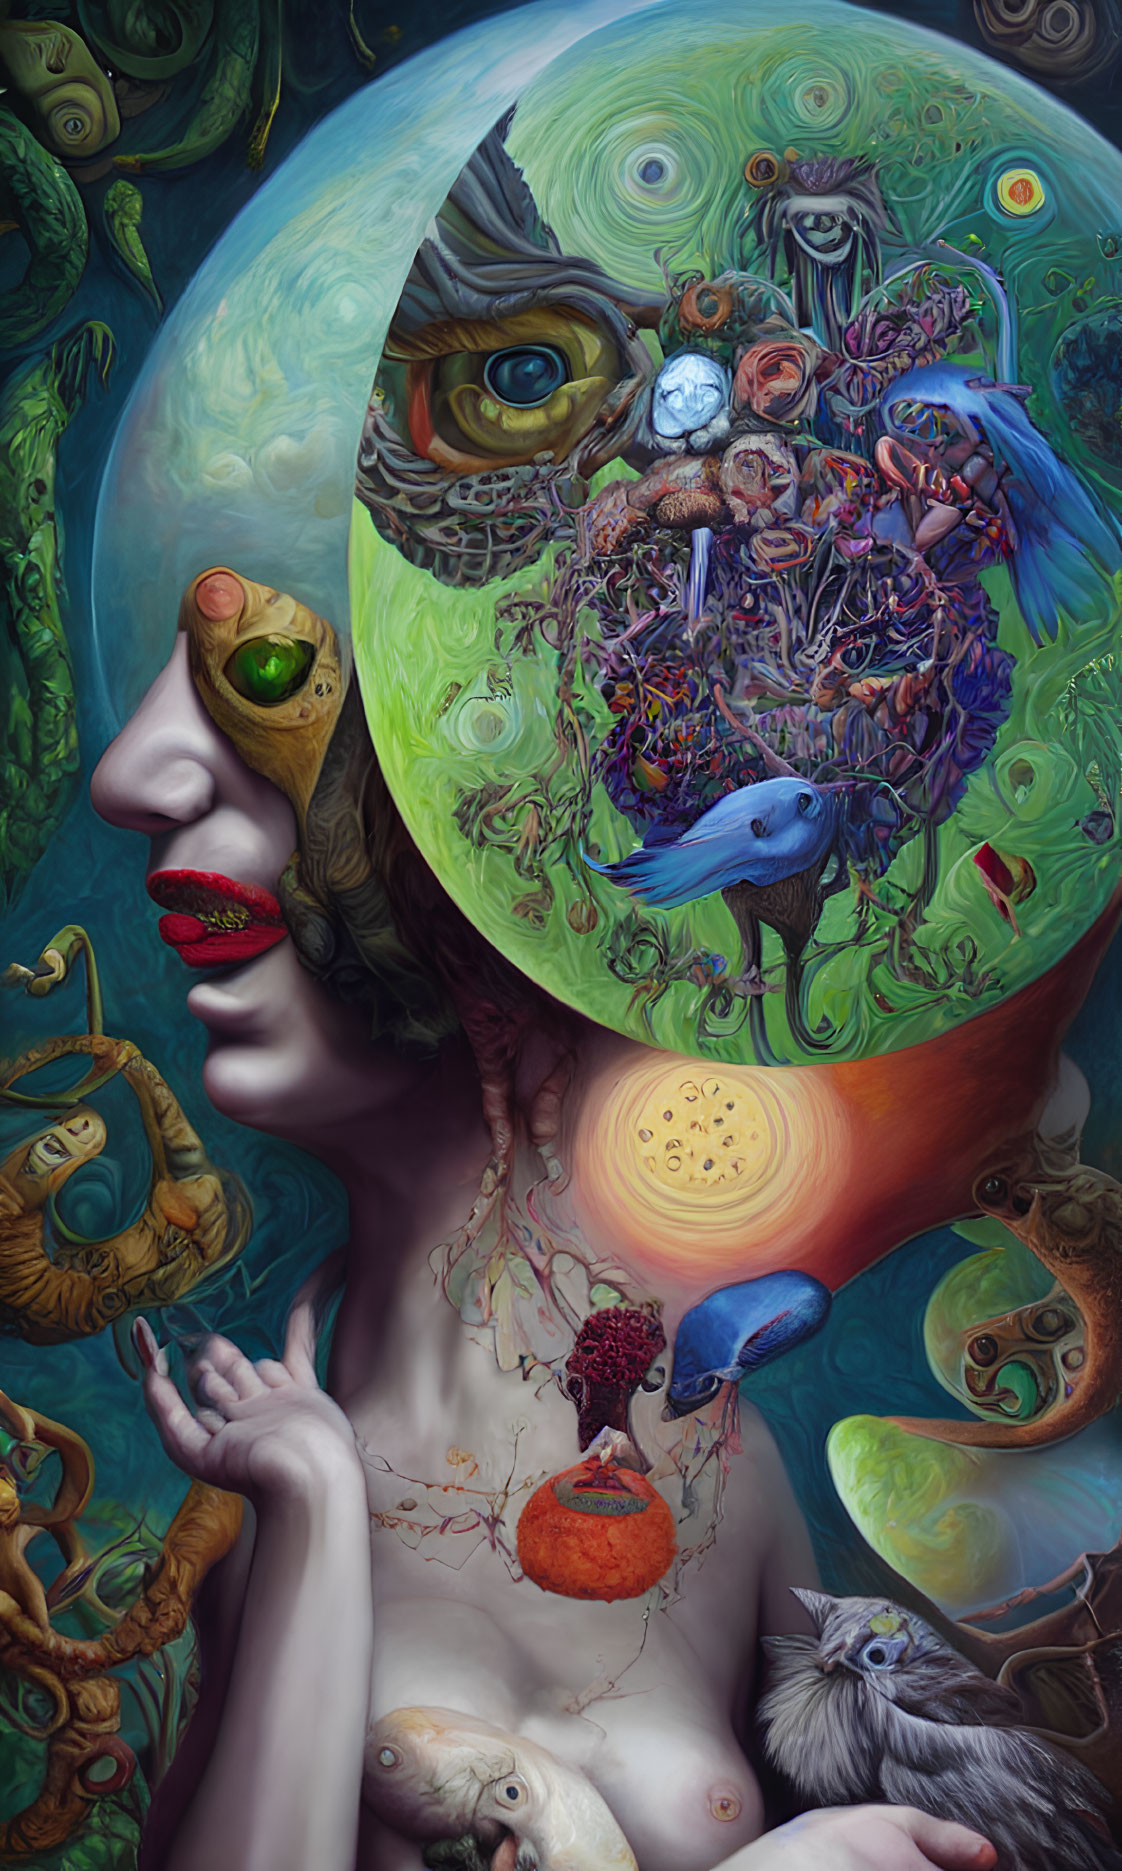 Surreal Artwork: Woman's Head with Cosmic Bubble Brain and Creatures